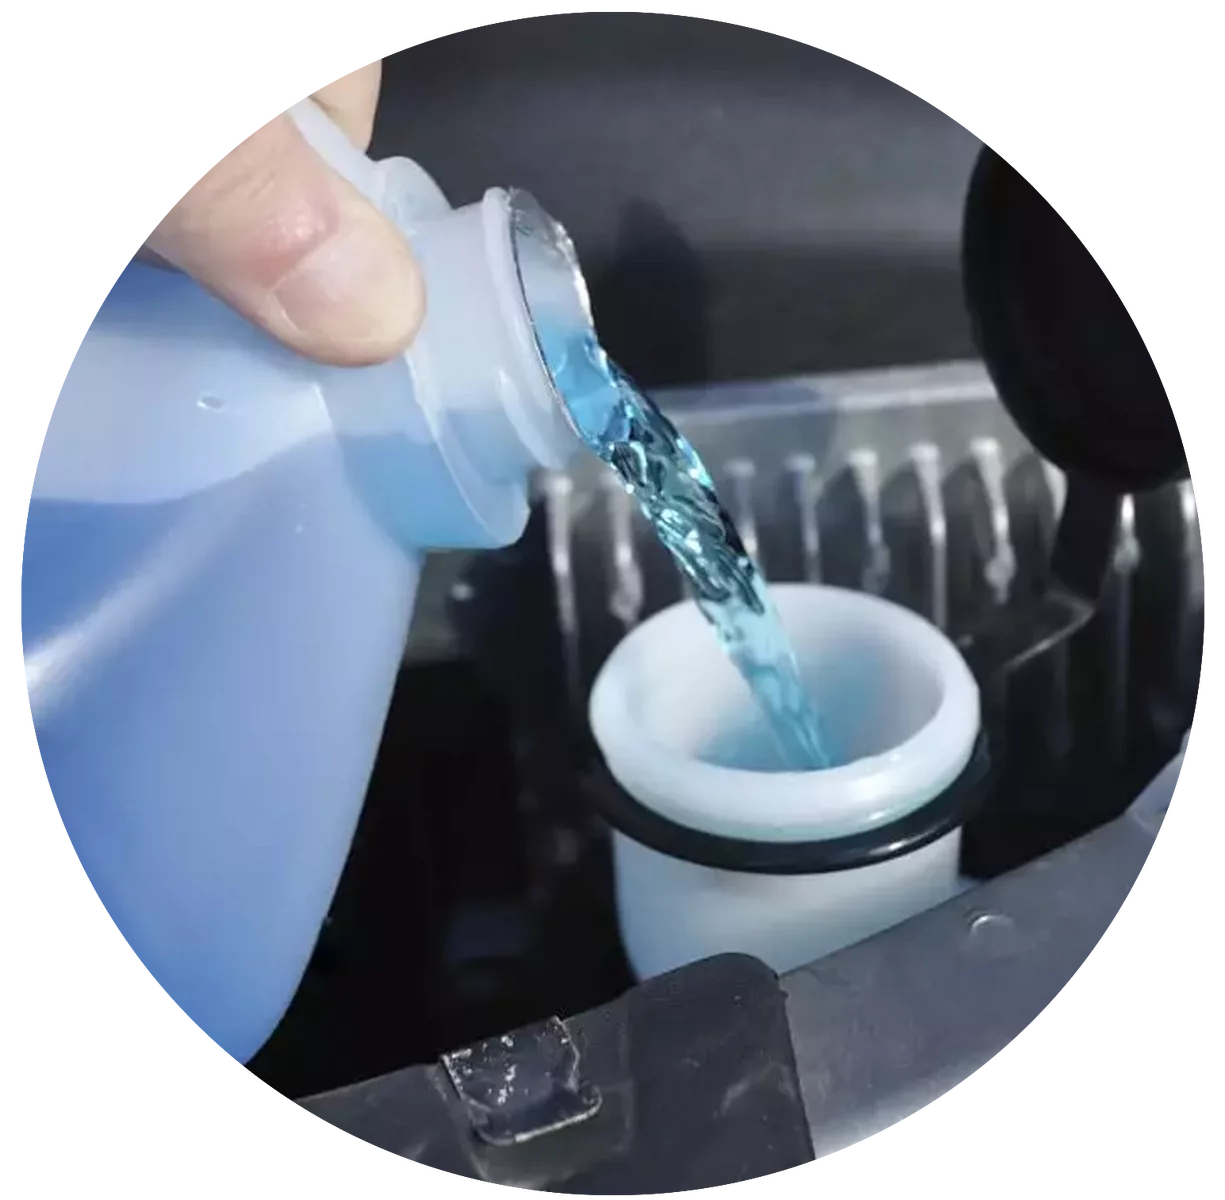  2022/09/Washer-Fluid.png 